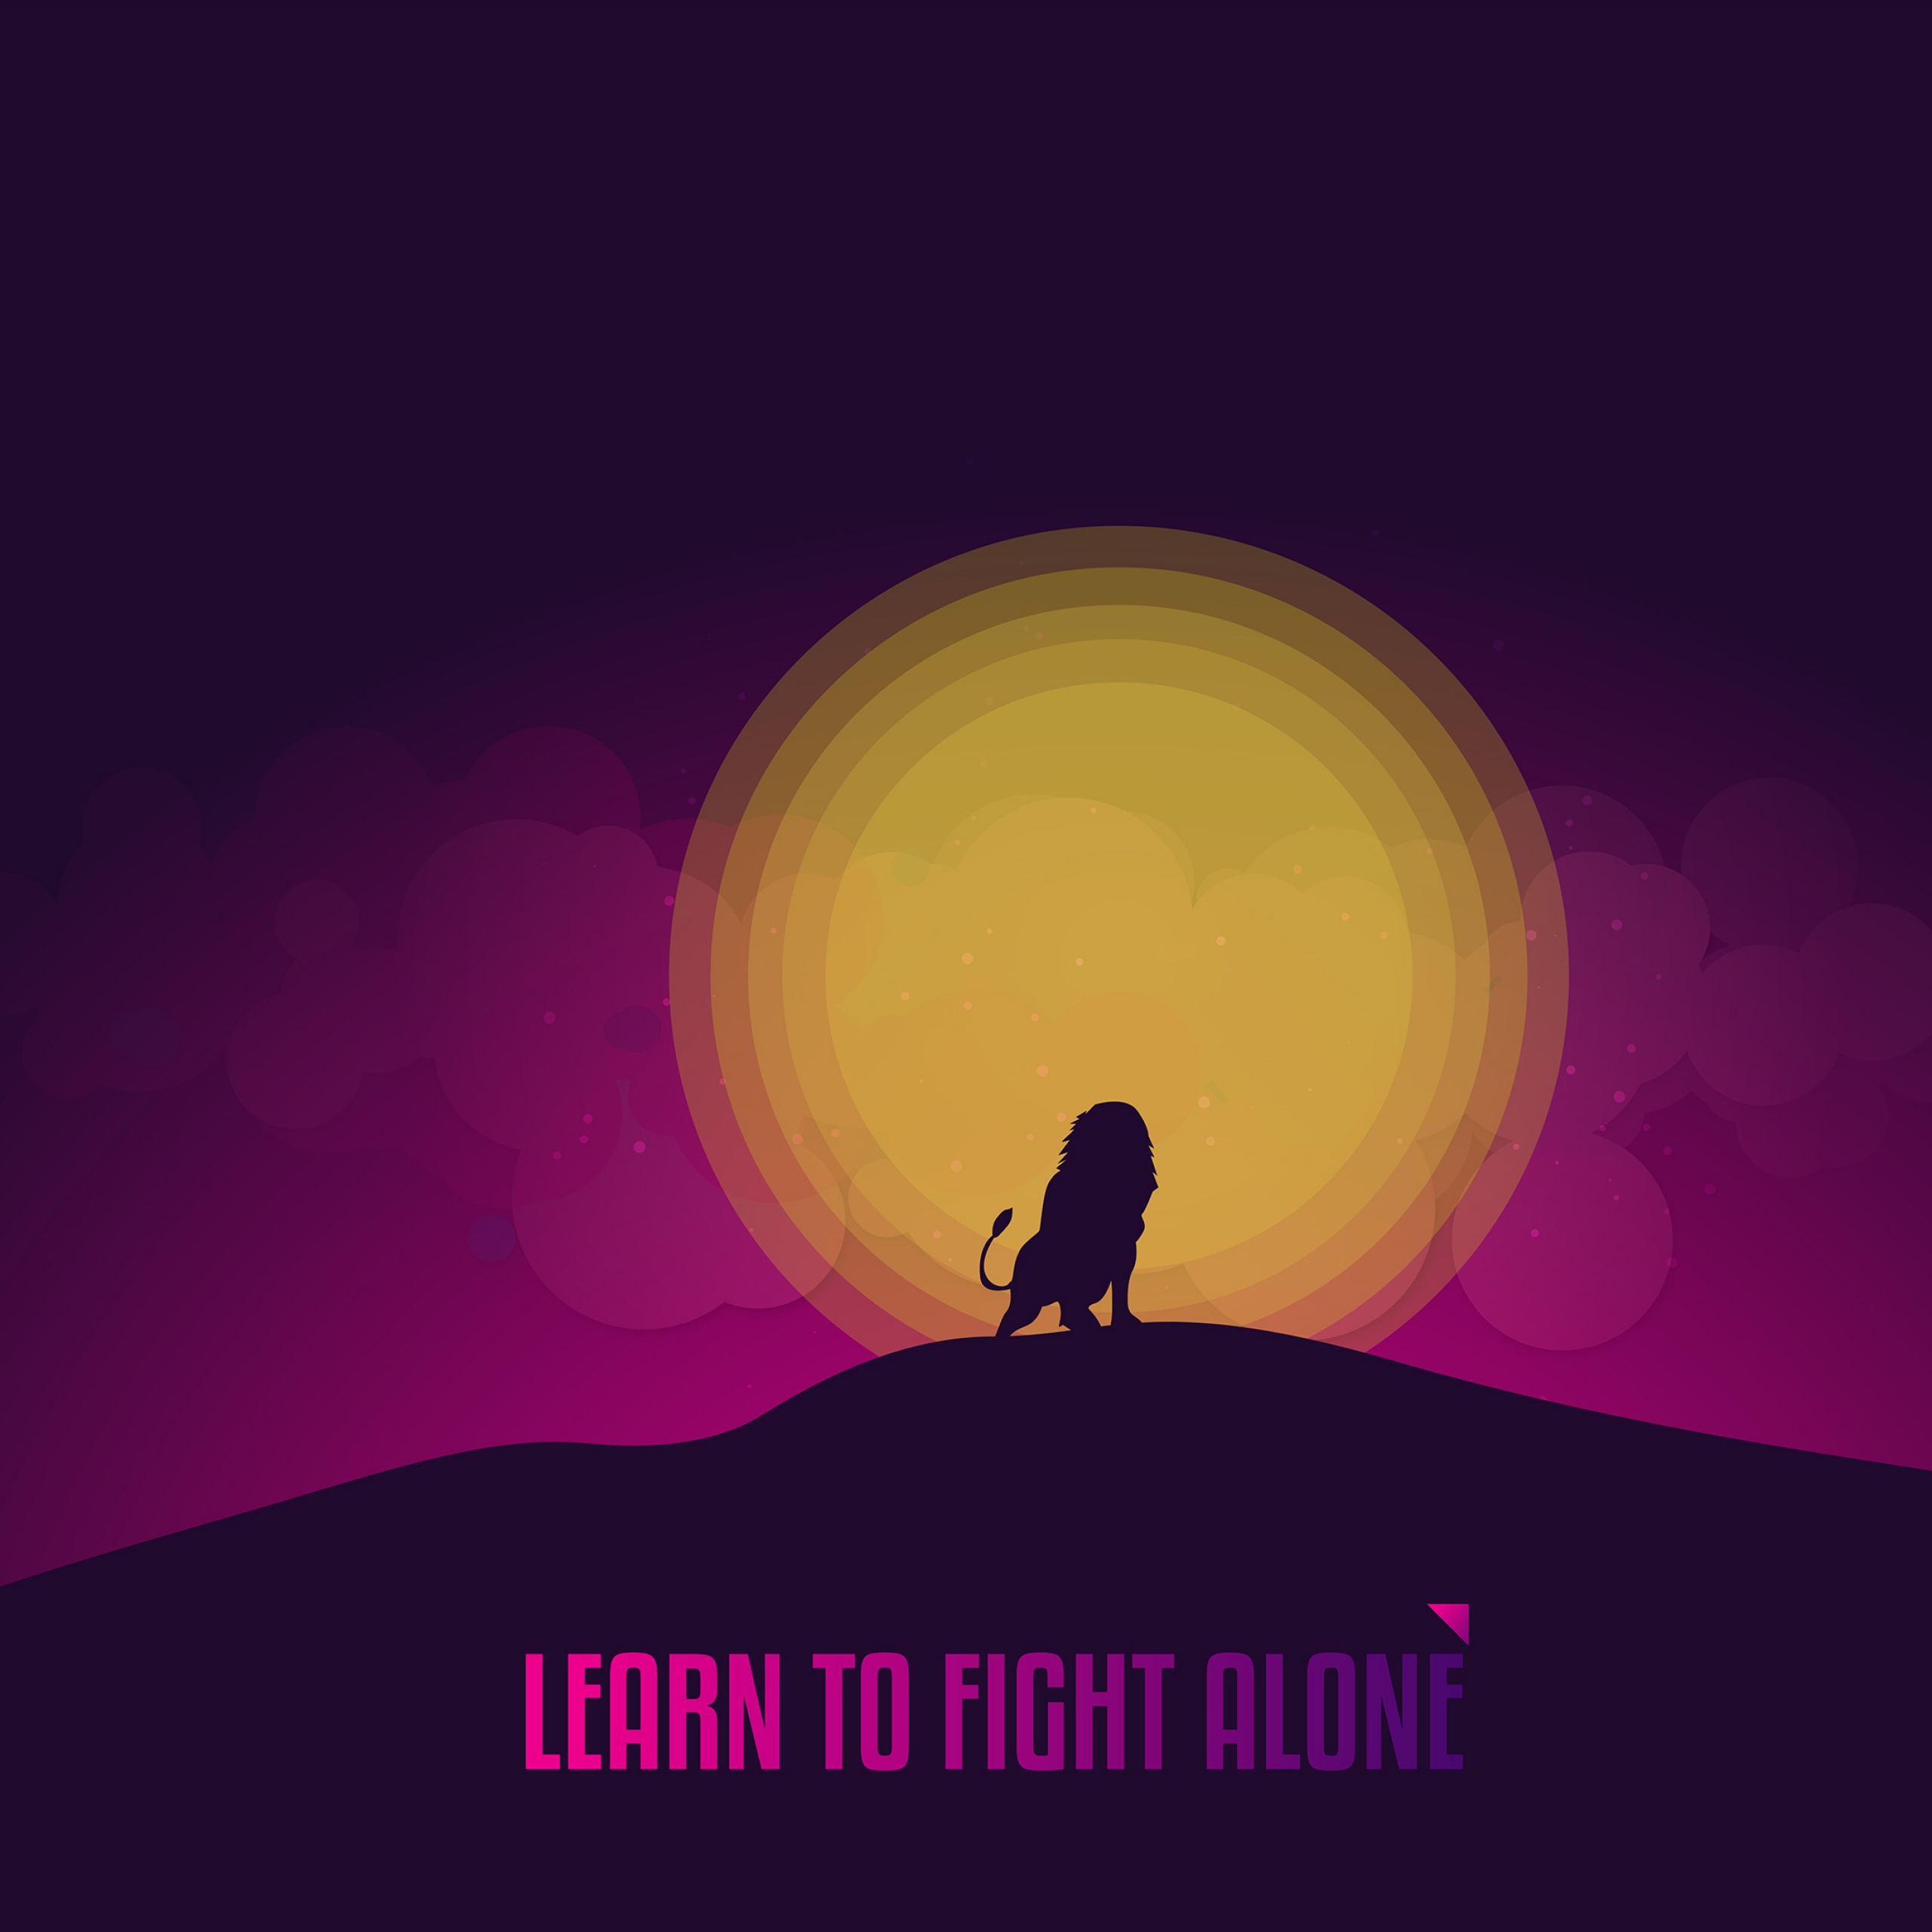 Learn to Fight Alone Wallpaper 4K, Popular quotes, Quotes